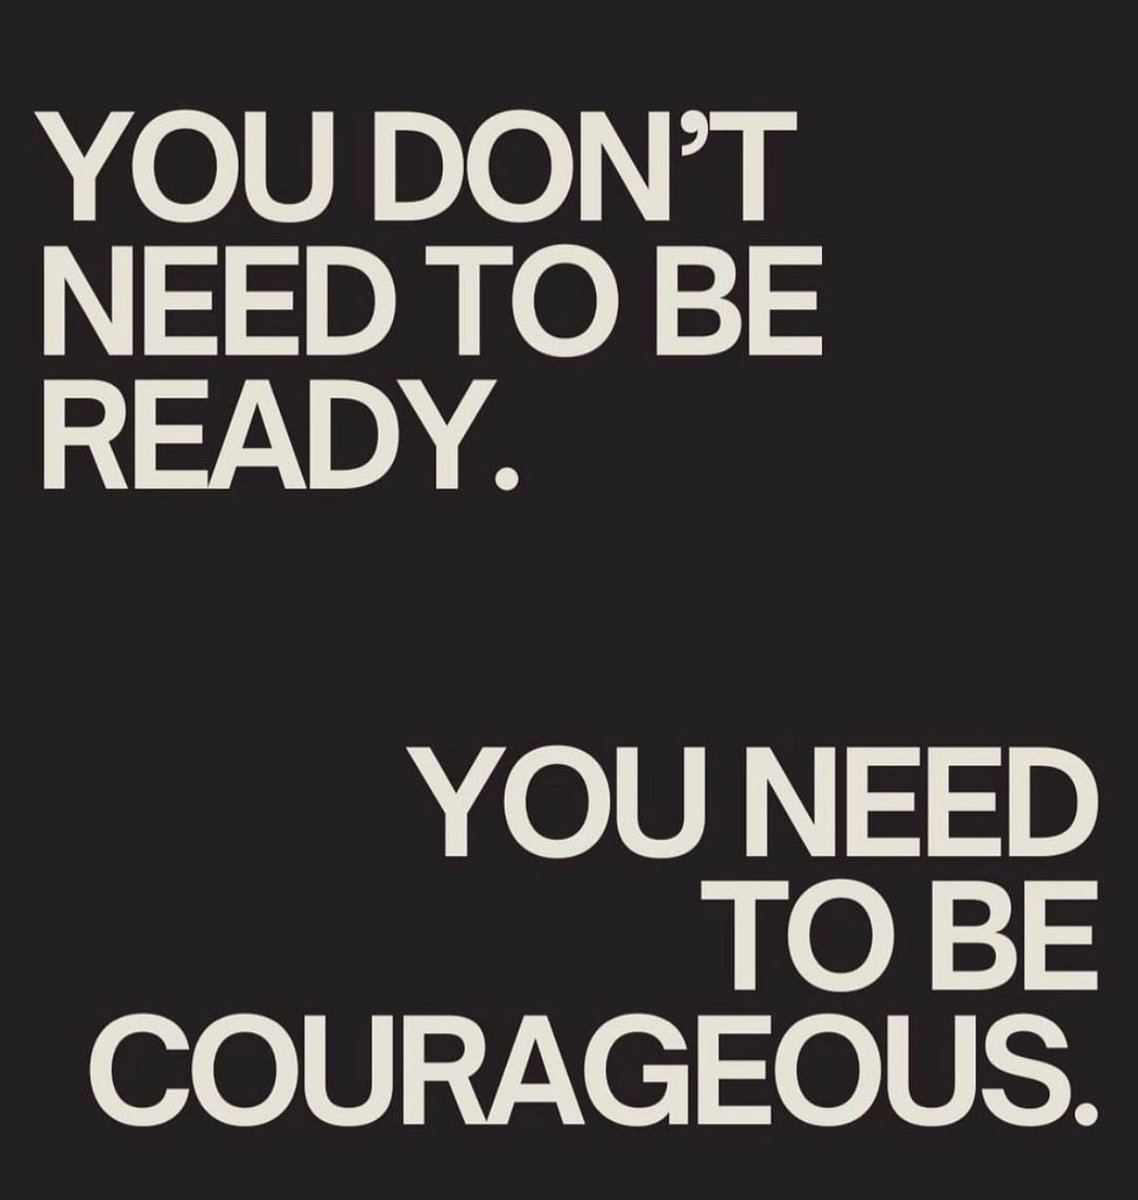 15DaysToGo to @ComradesRace -Courageous and allow yourself to be vulnerable